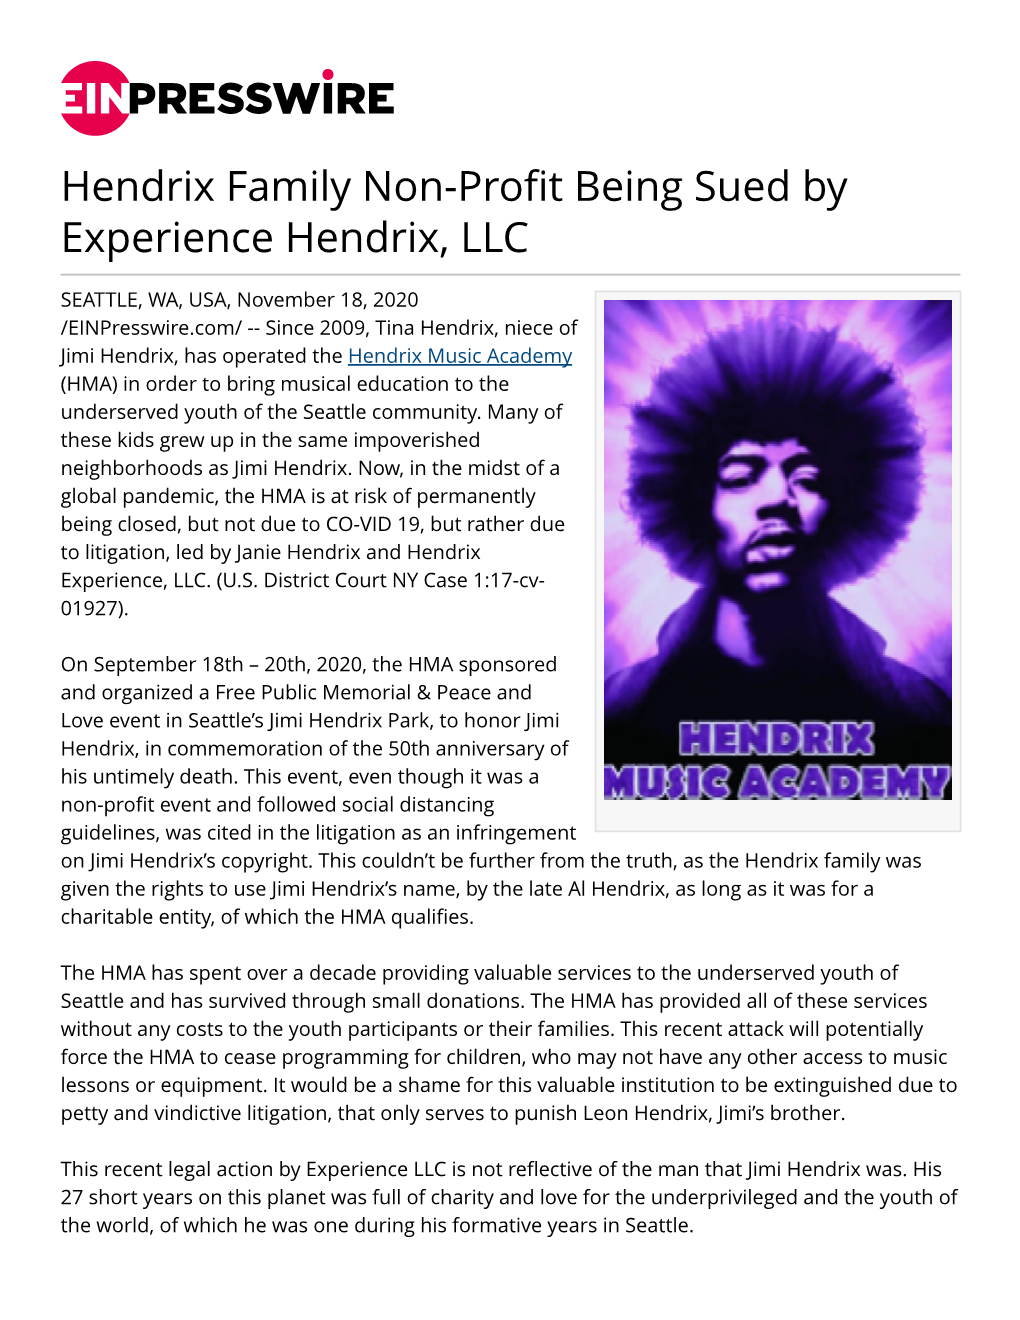 Hendrix Family Non-Profit Being Sued by Experience Hendrix, LLC